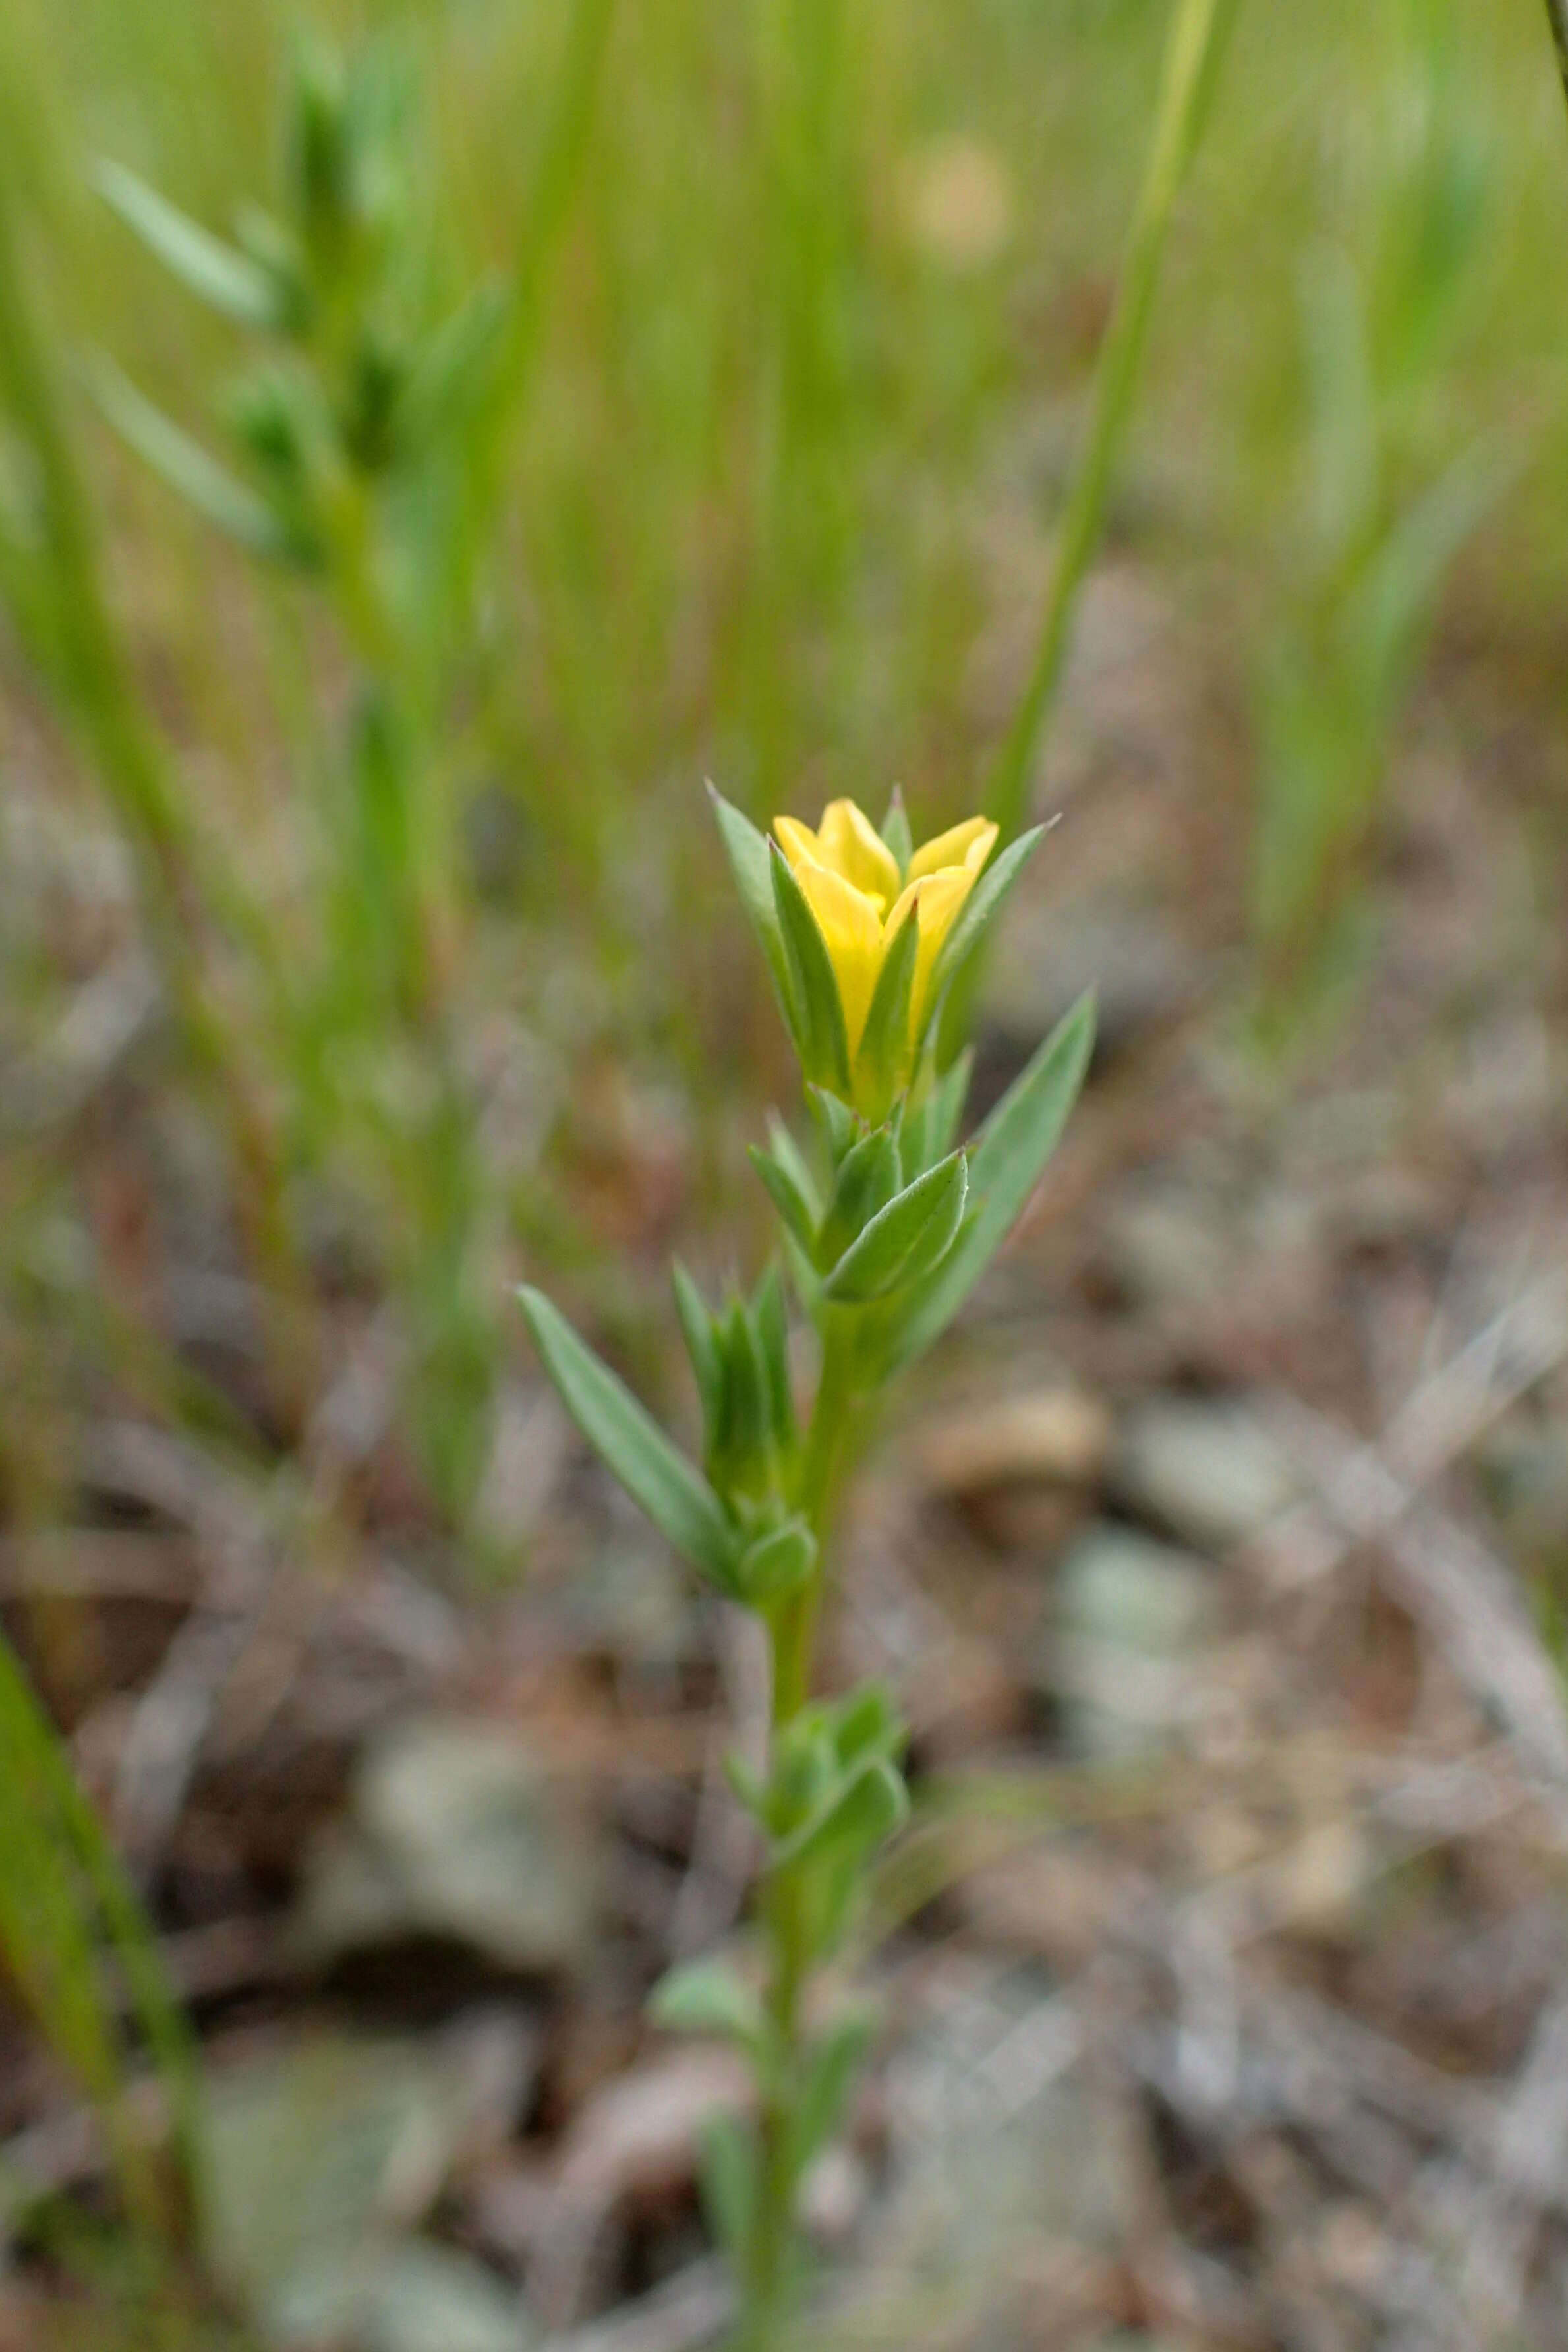 Image of Upright Flax